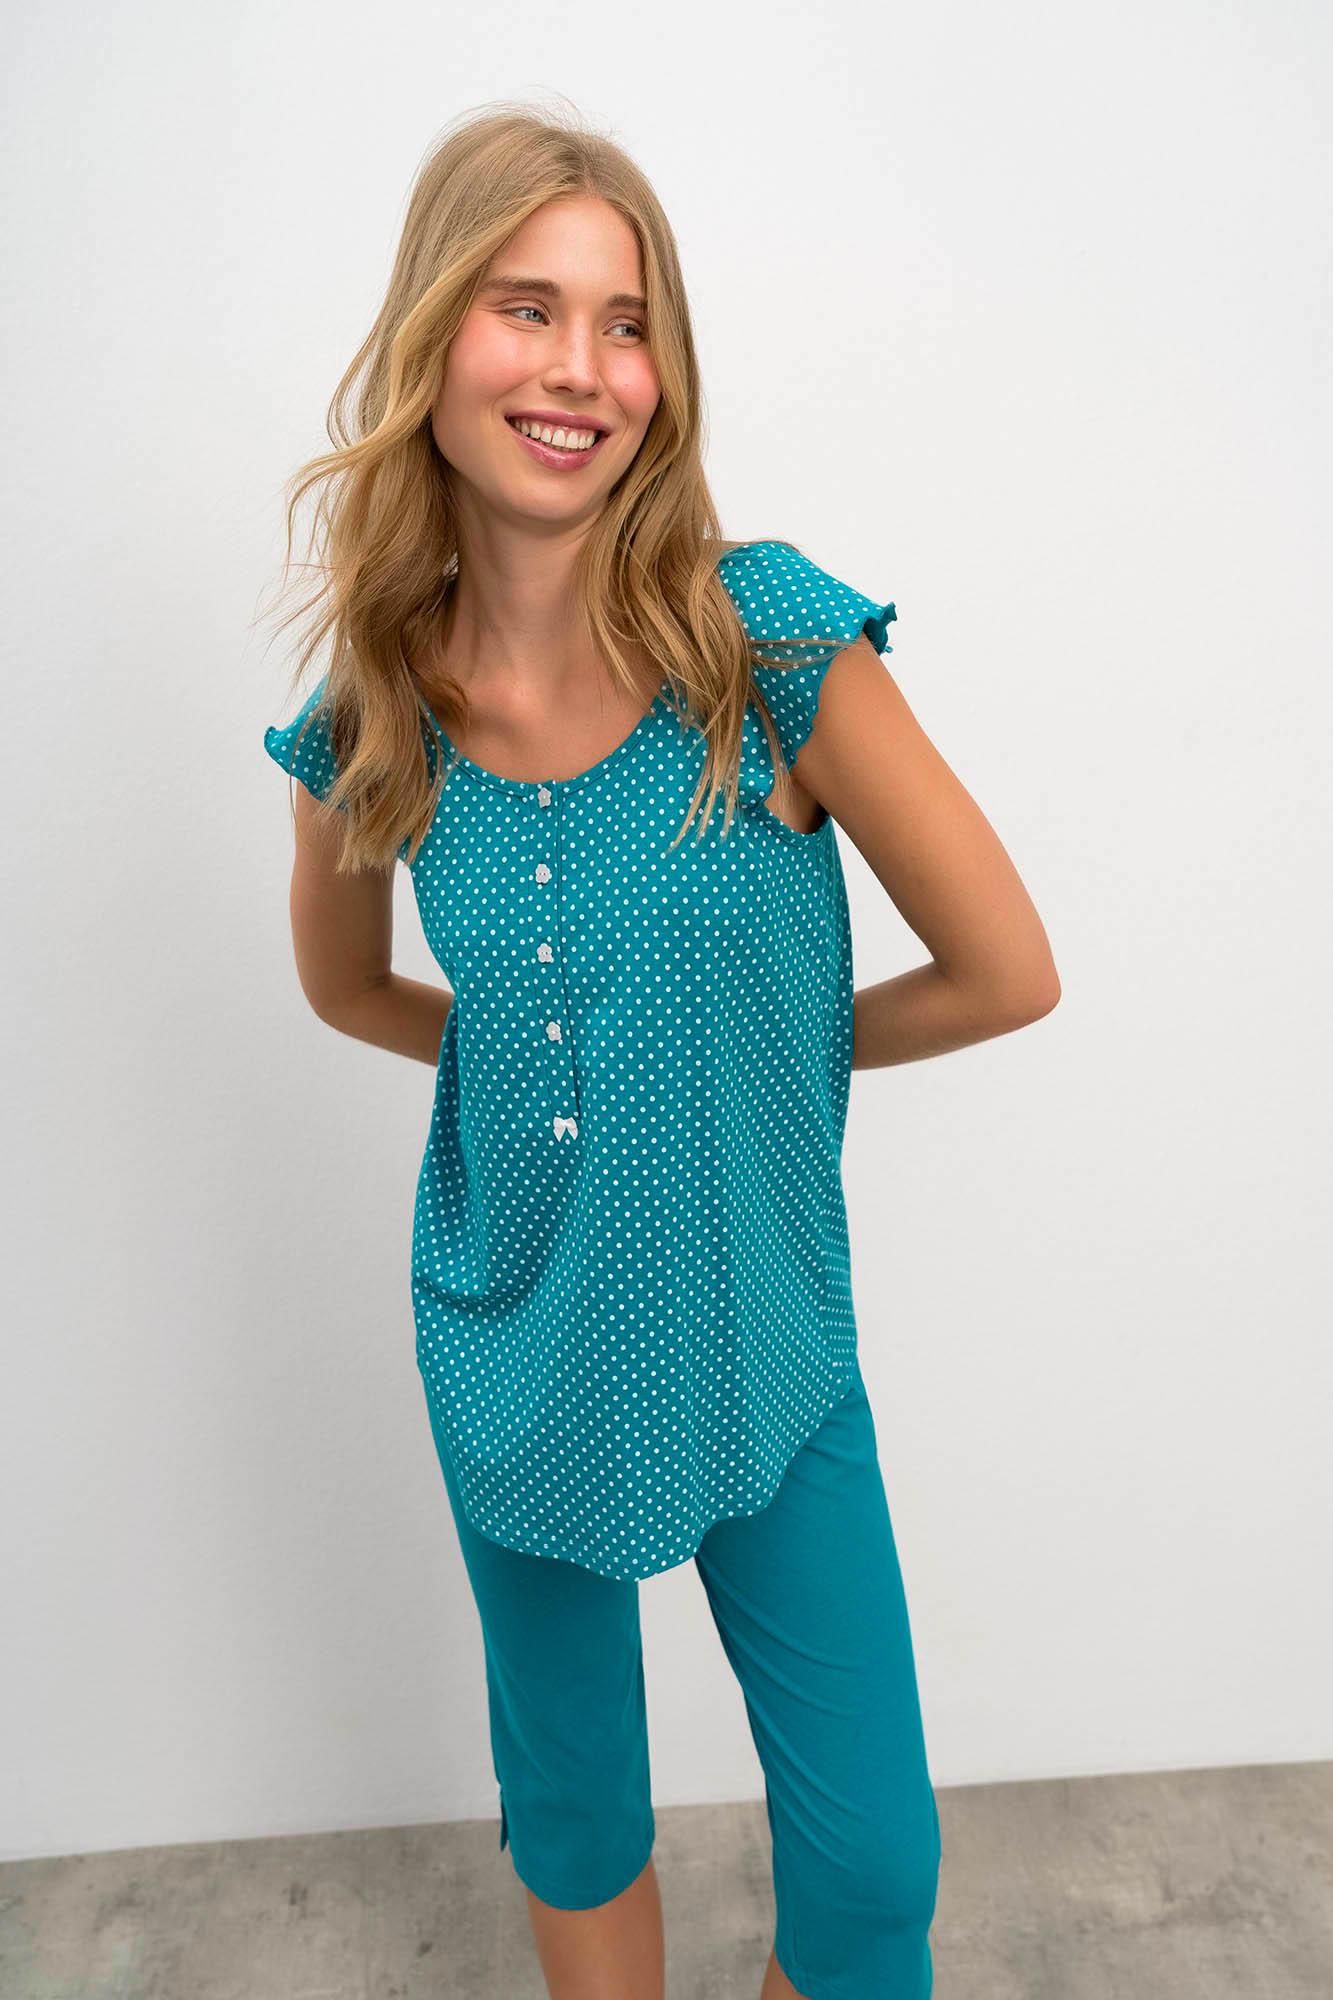 Woman’s Pyjamas with button placket